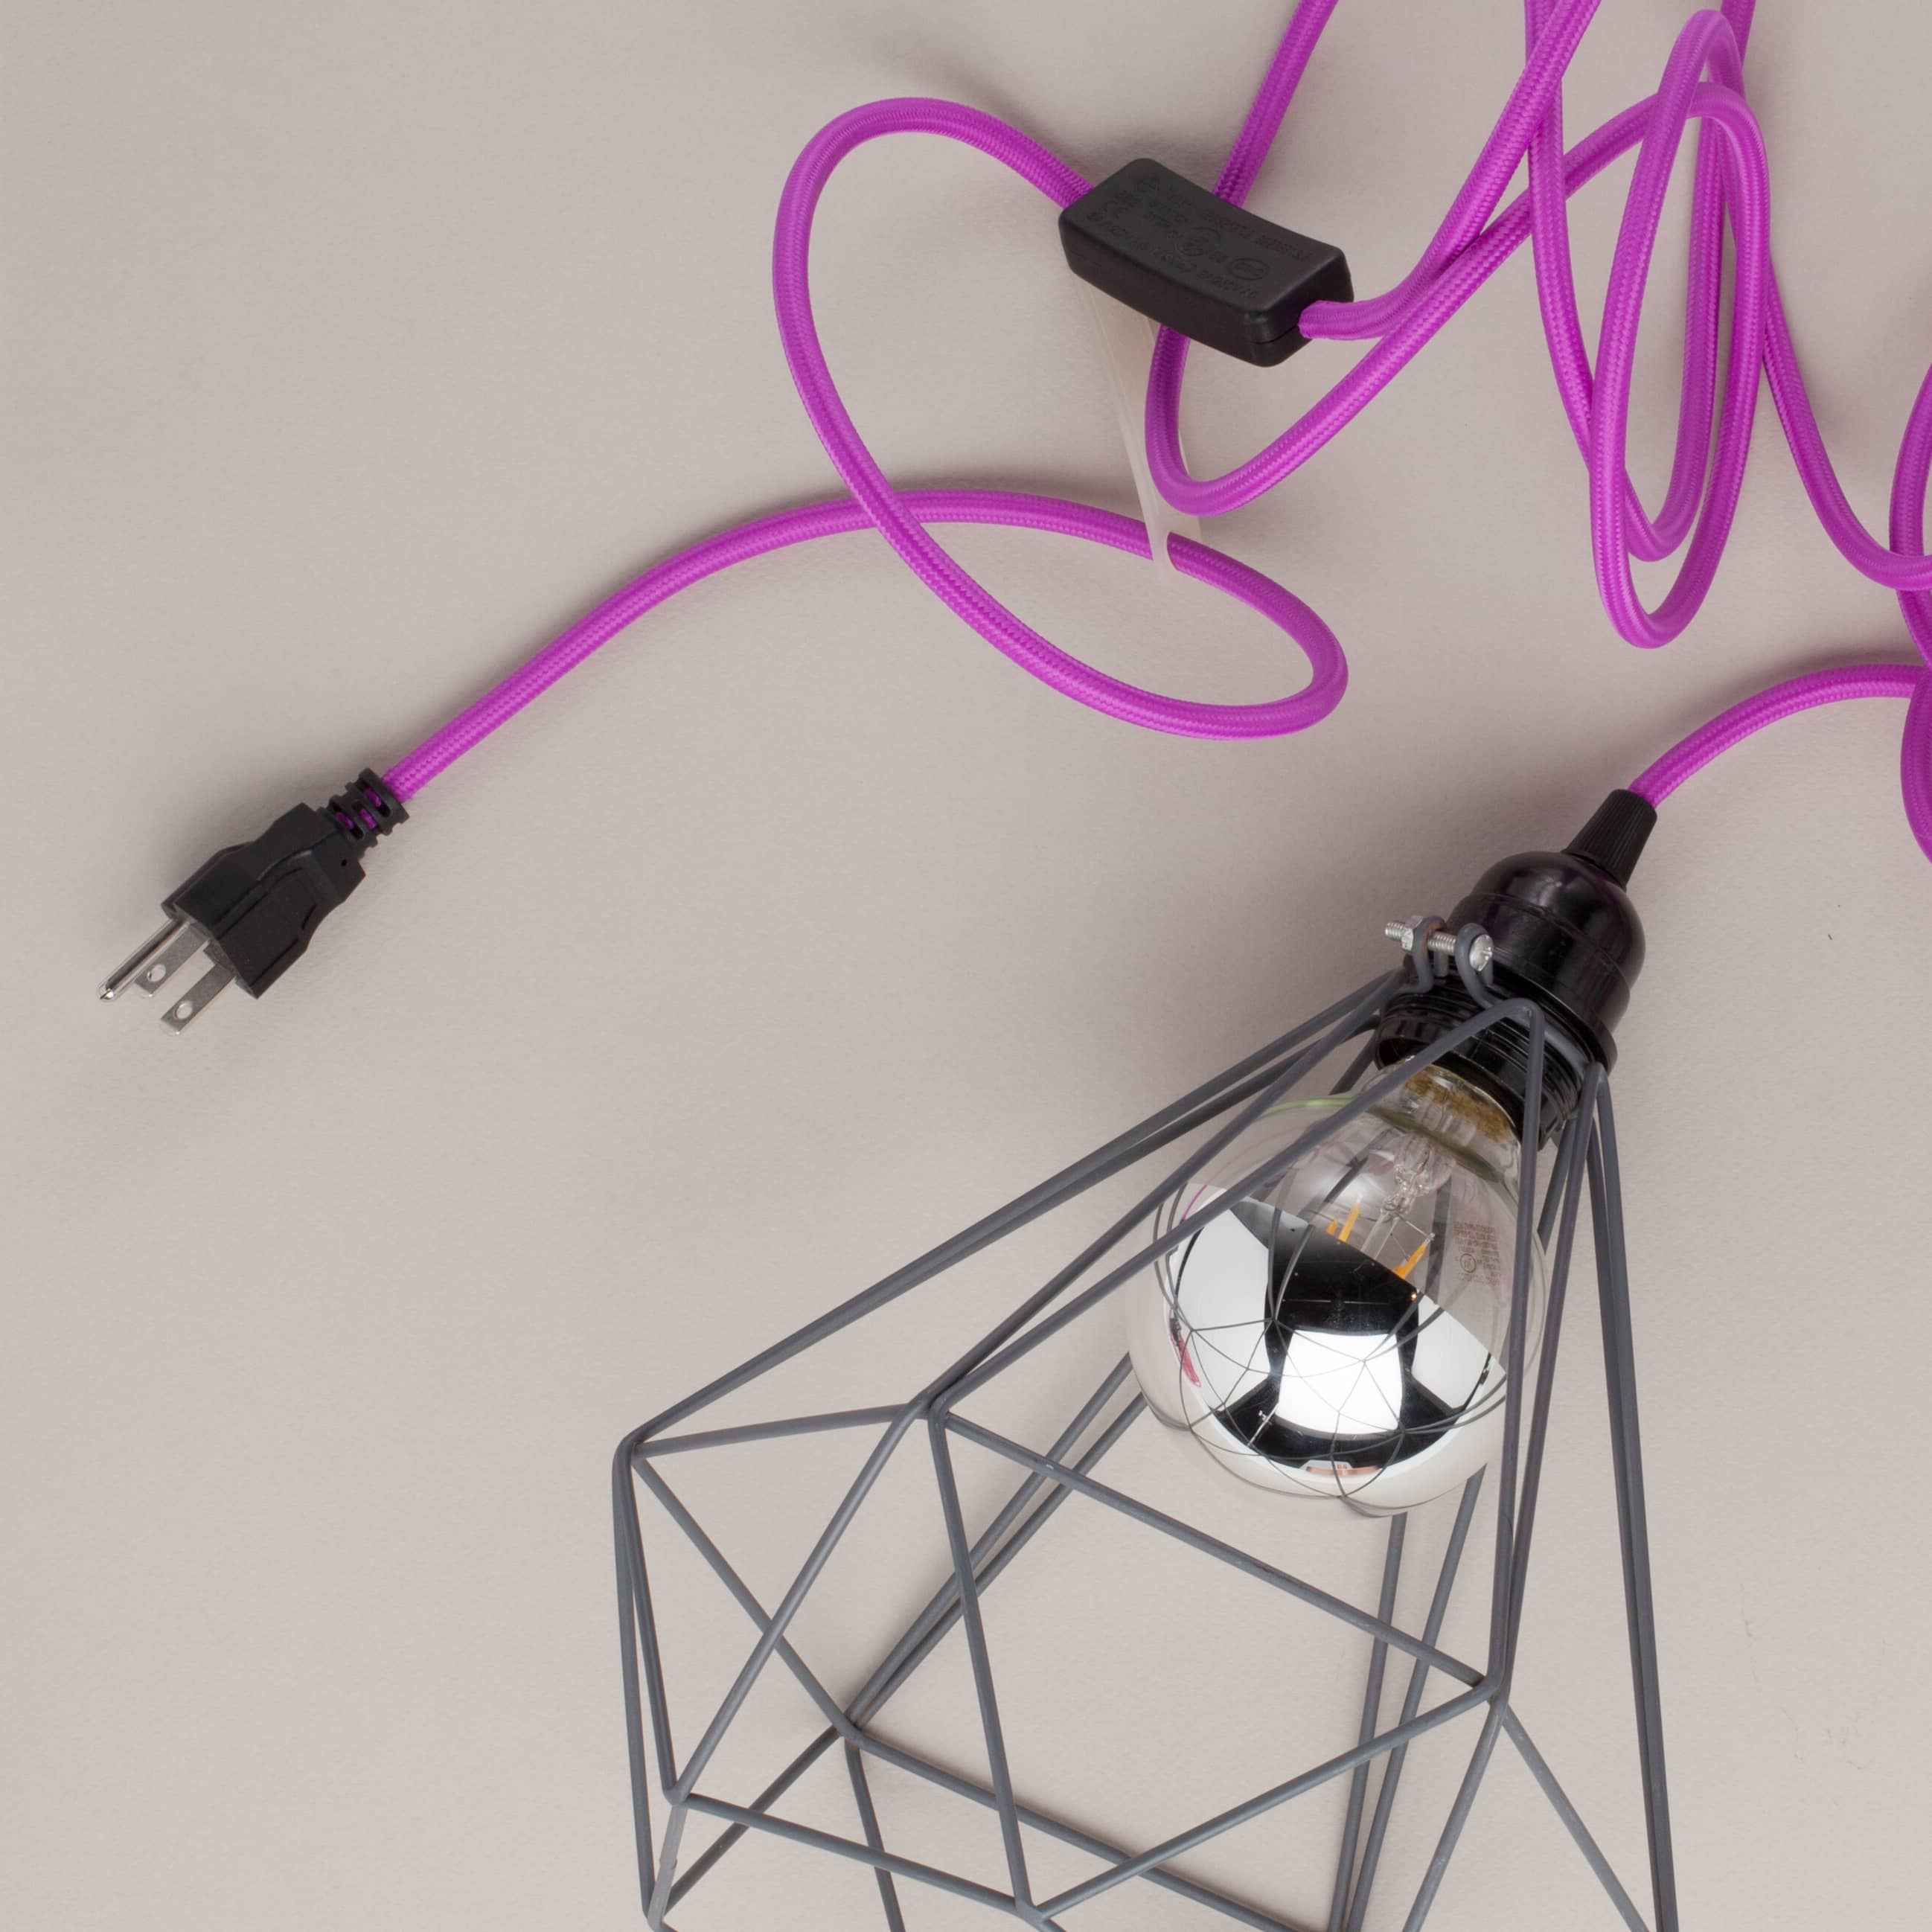 DIY Fabric Wire by the Foot - Magenta